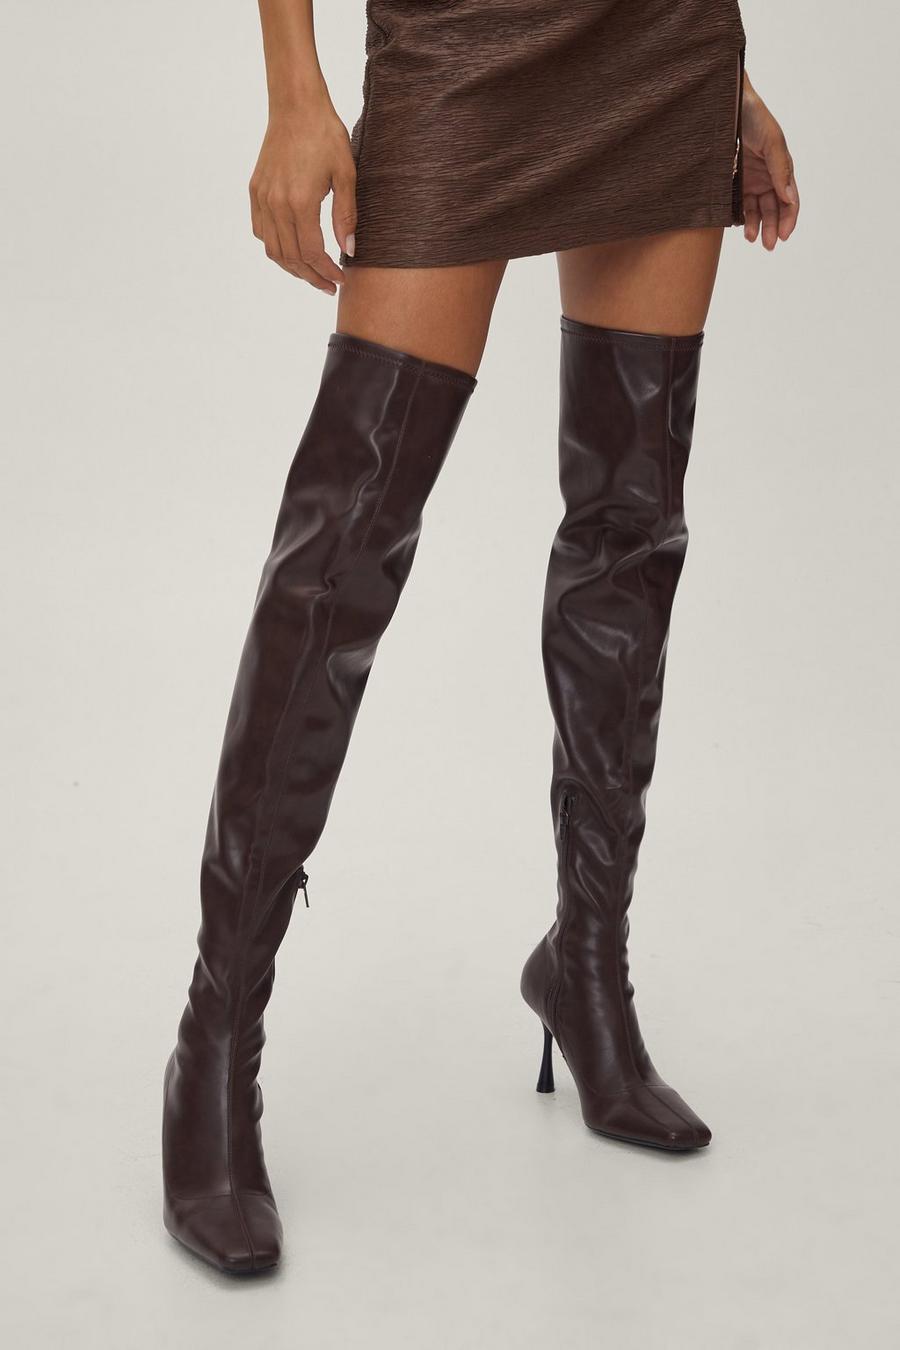 Stretch Faux Leather Stiletto Over The Knee Boots